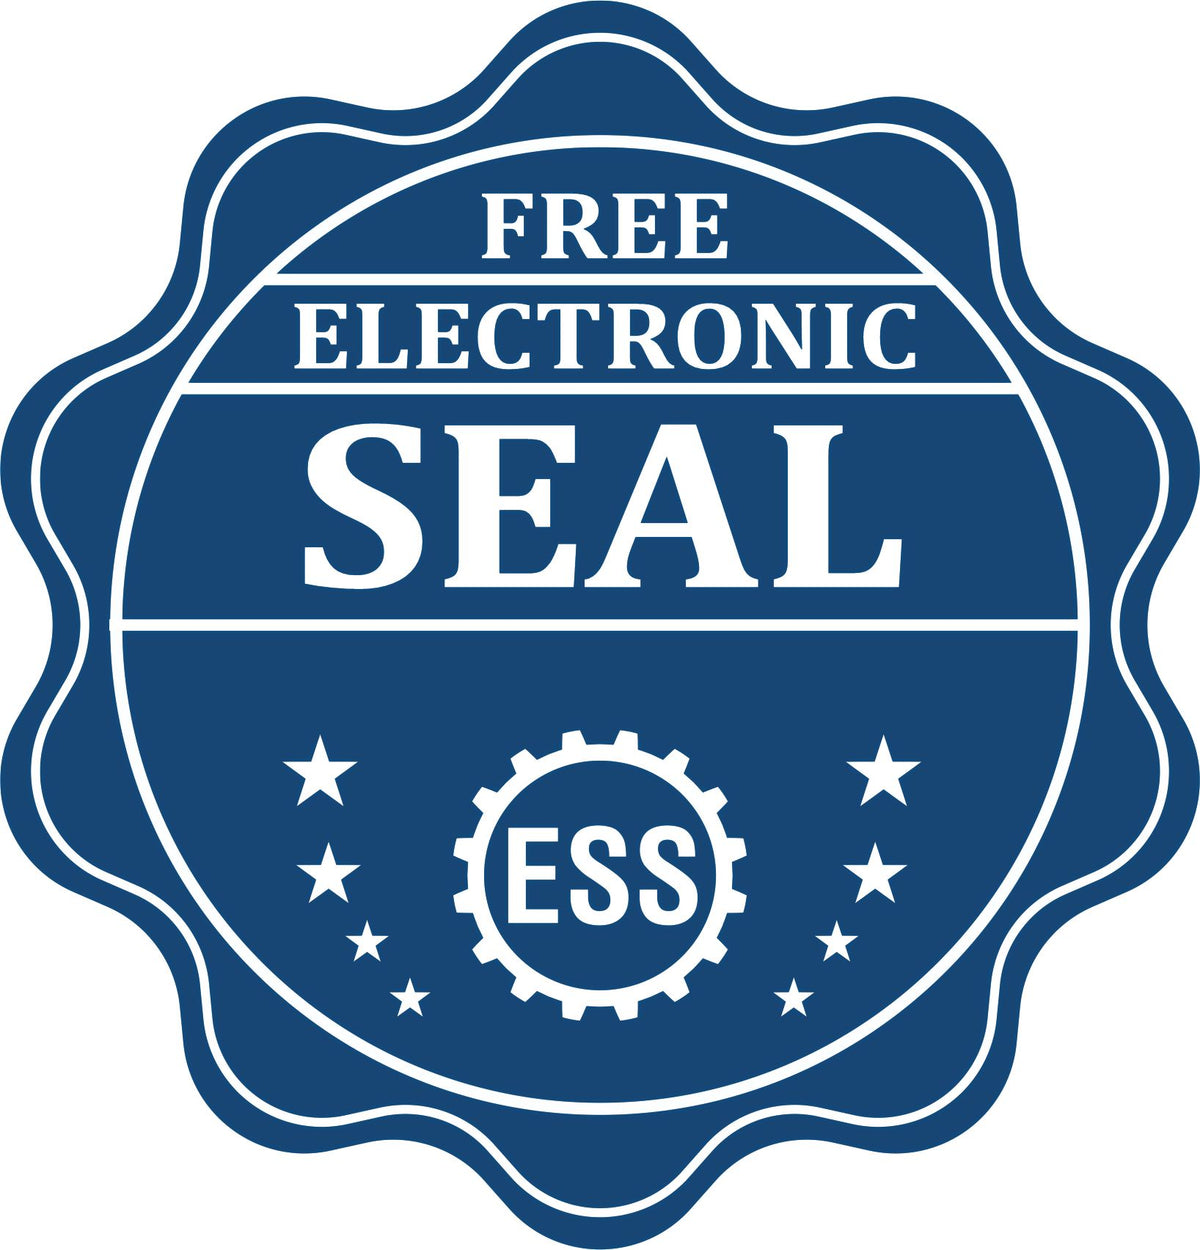 A badge showing a free electronic seal for the Hybrid New Hampshire Land Surveyor Seal with stars and the ESS gear on the emblem.